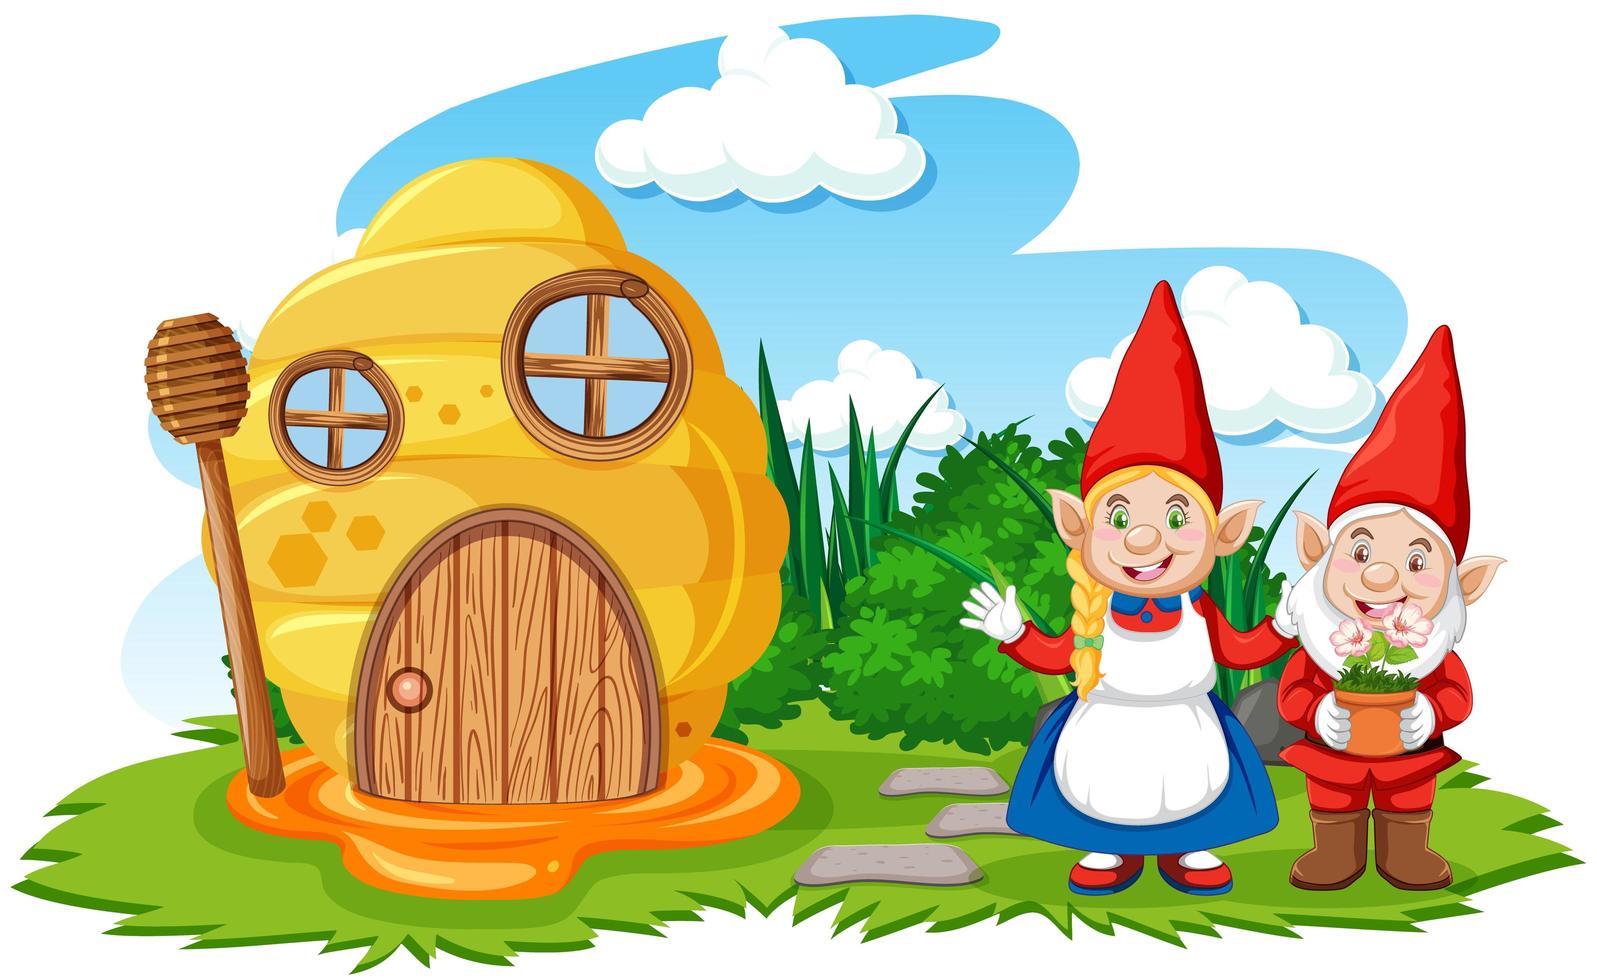 Gnomes and honeycomb house in the garden cartoon style on sky background vector